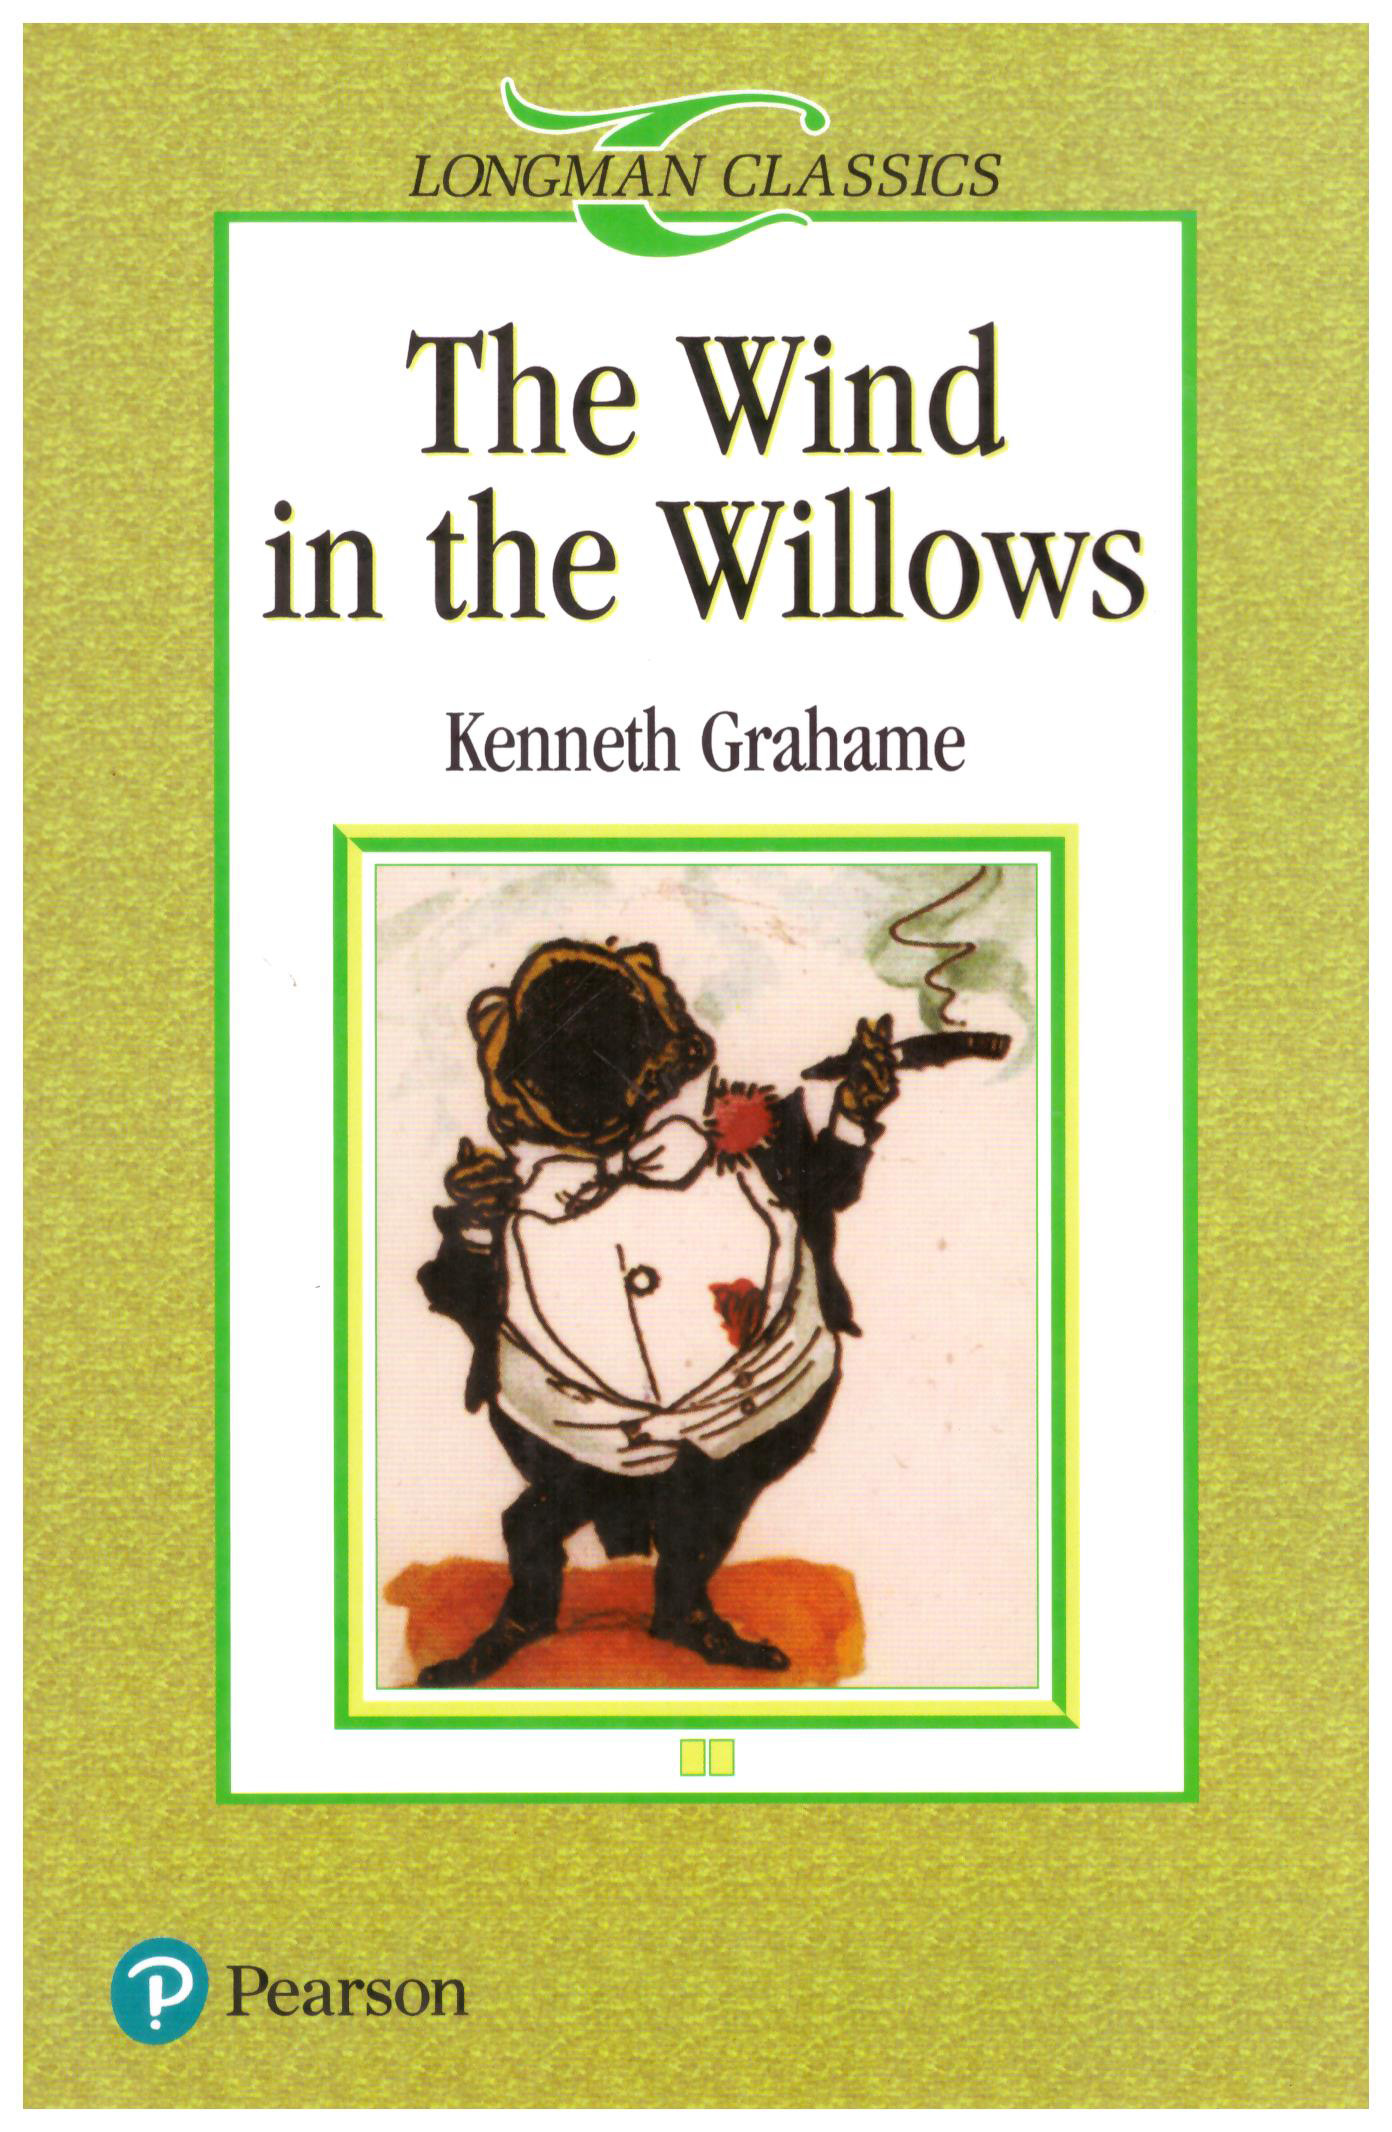 The Wind in the Willows (Longman Classics)